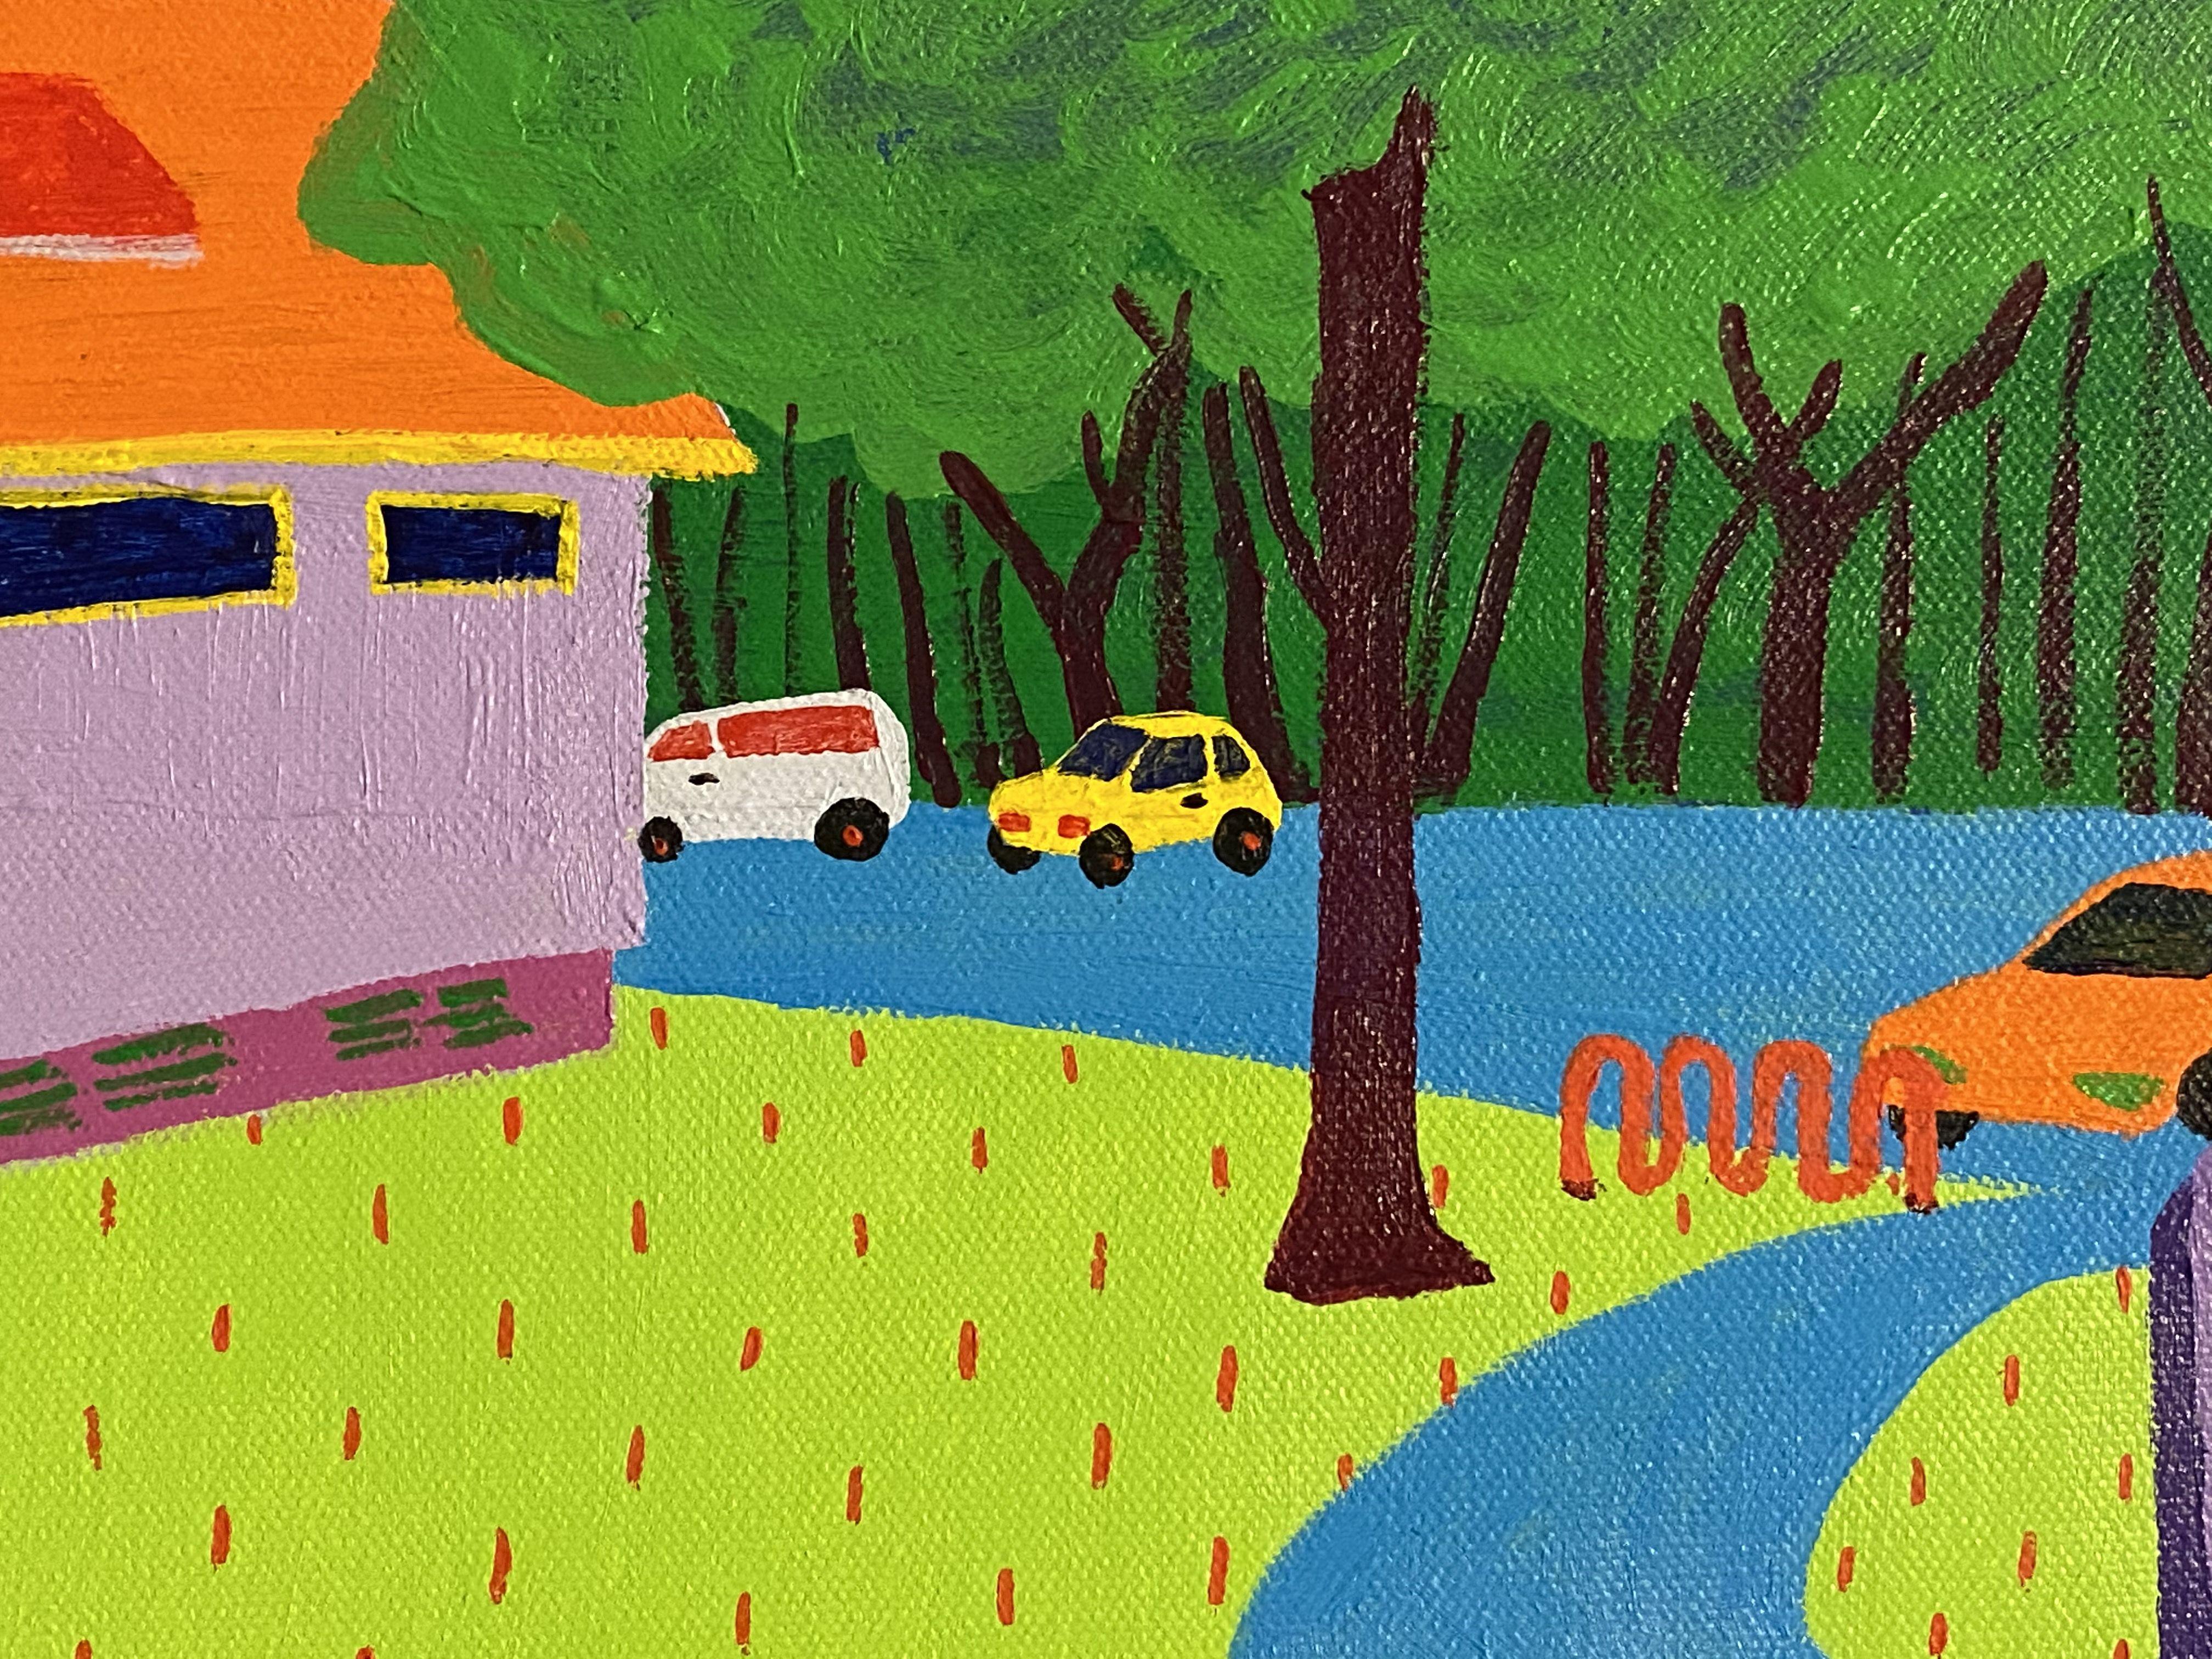 This painting is a re-creation of an interesting landscape scene I frequent often. It is located in Eagle Lake Park near my home. The lavender building is the bathroom, a nice convenience for my long walks haha. The bike racks were the most fun to